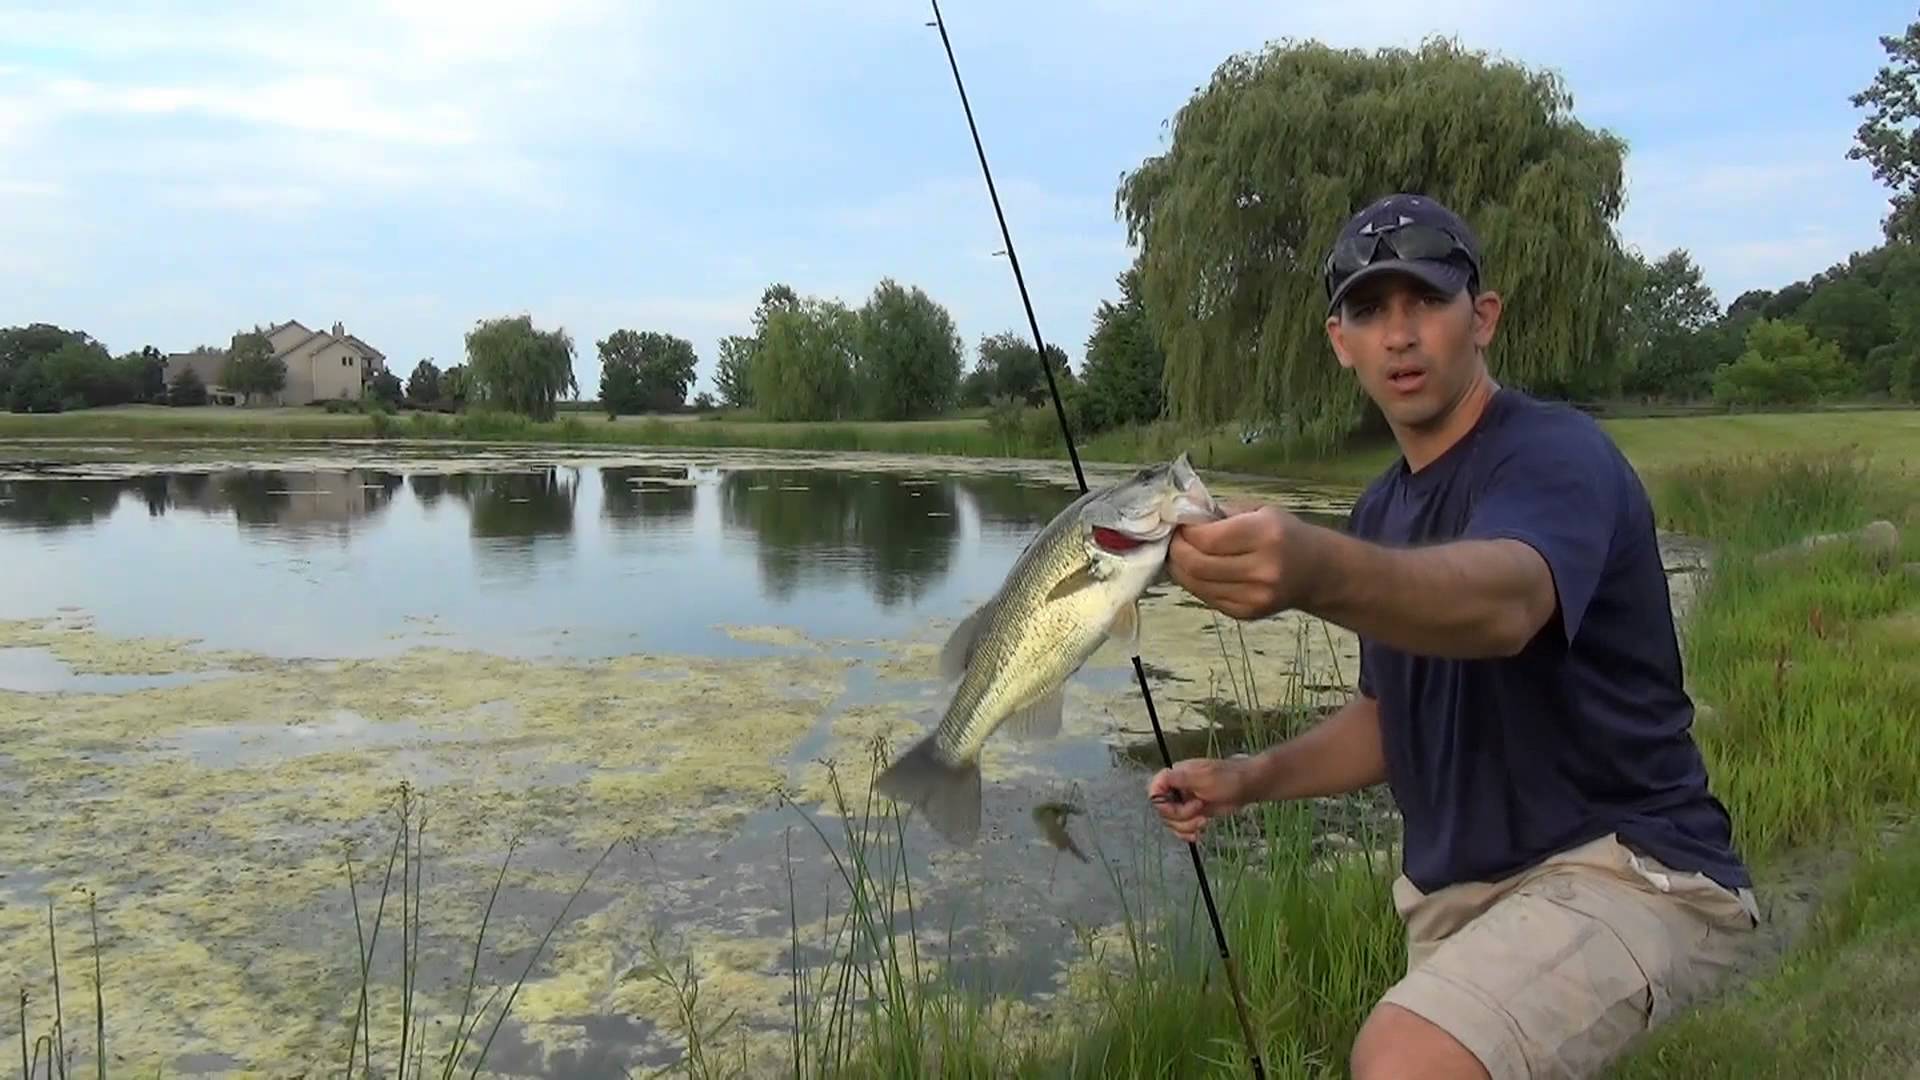 Pond Bass Fishing - Summer Weeds & Wacky Worms - YouTube